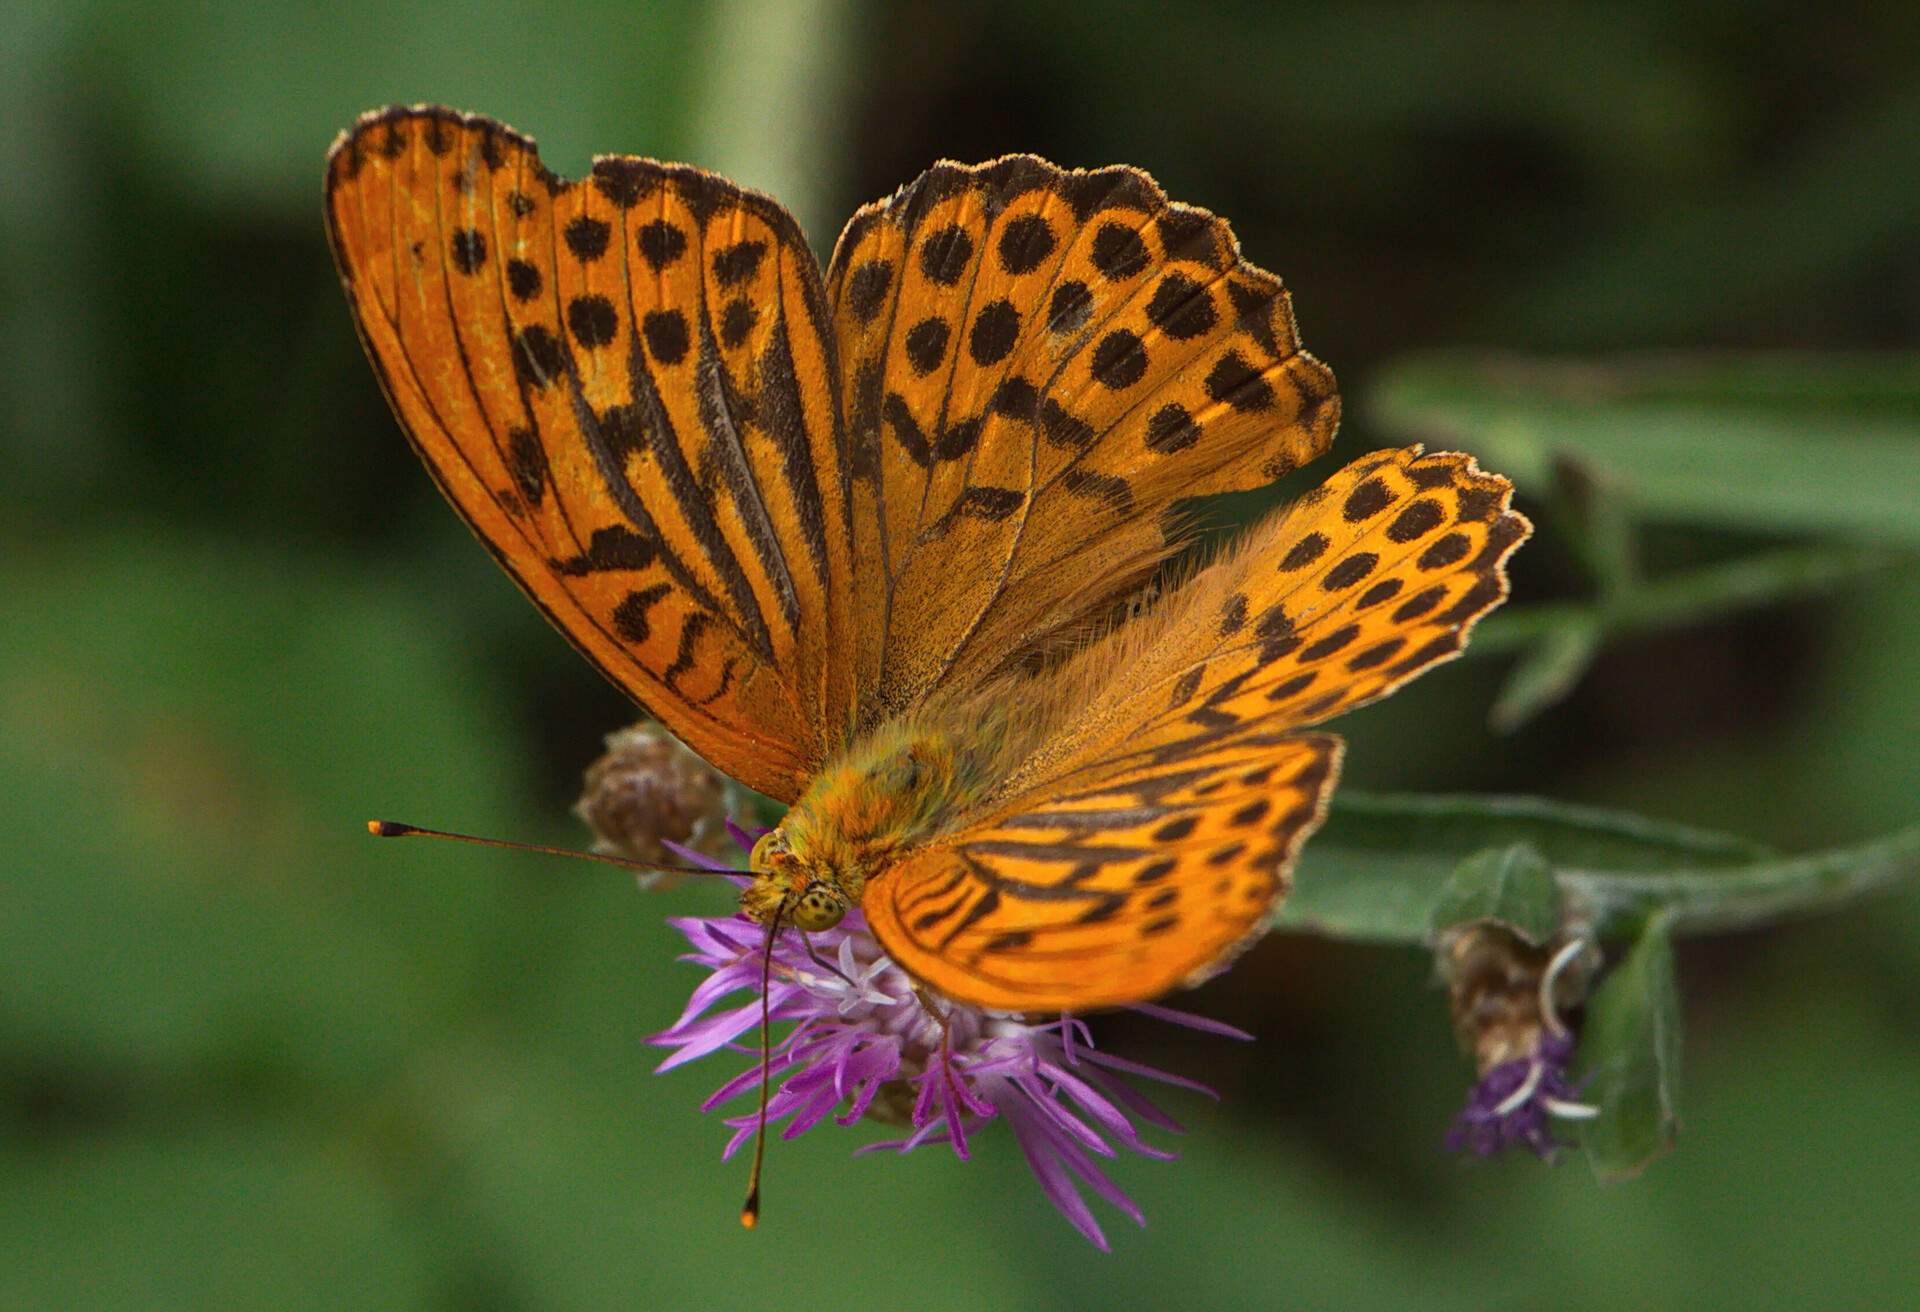 A yellow butterfly with black spots on its wings landing on a flower.